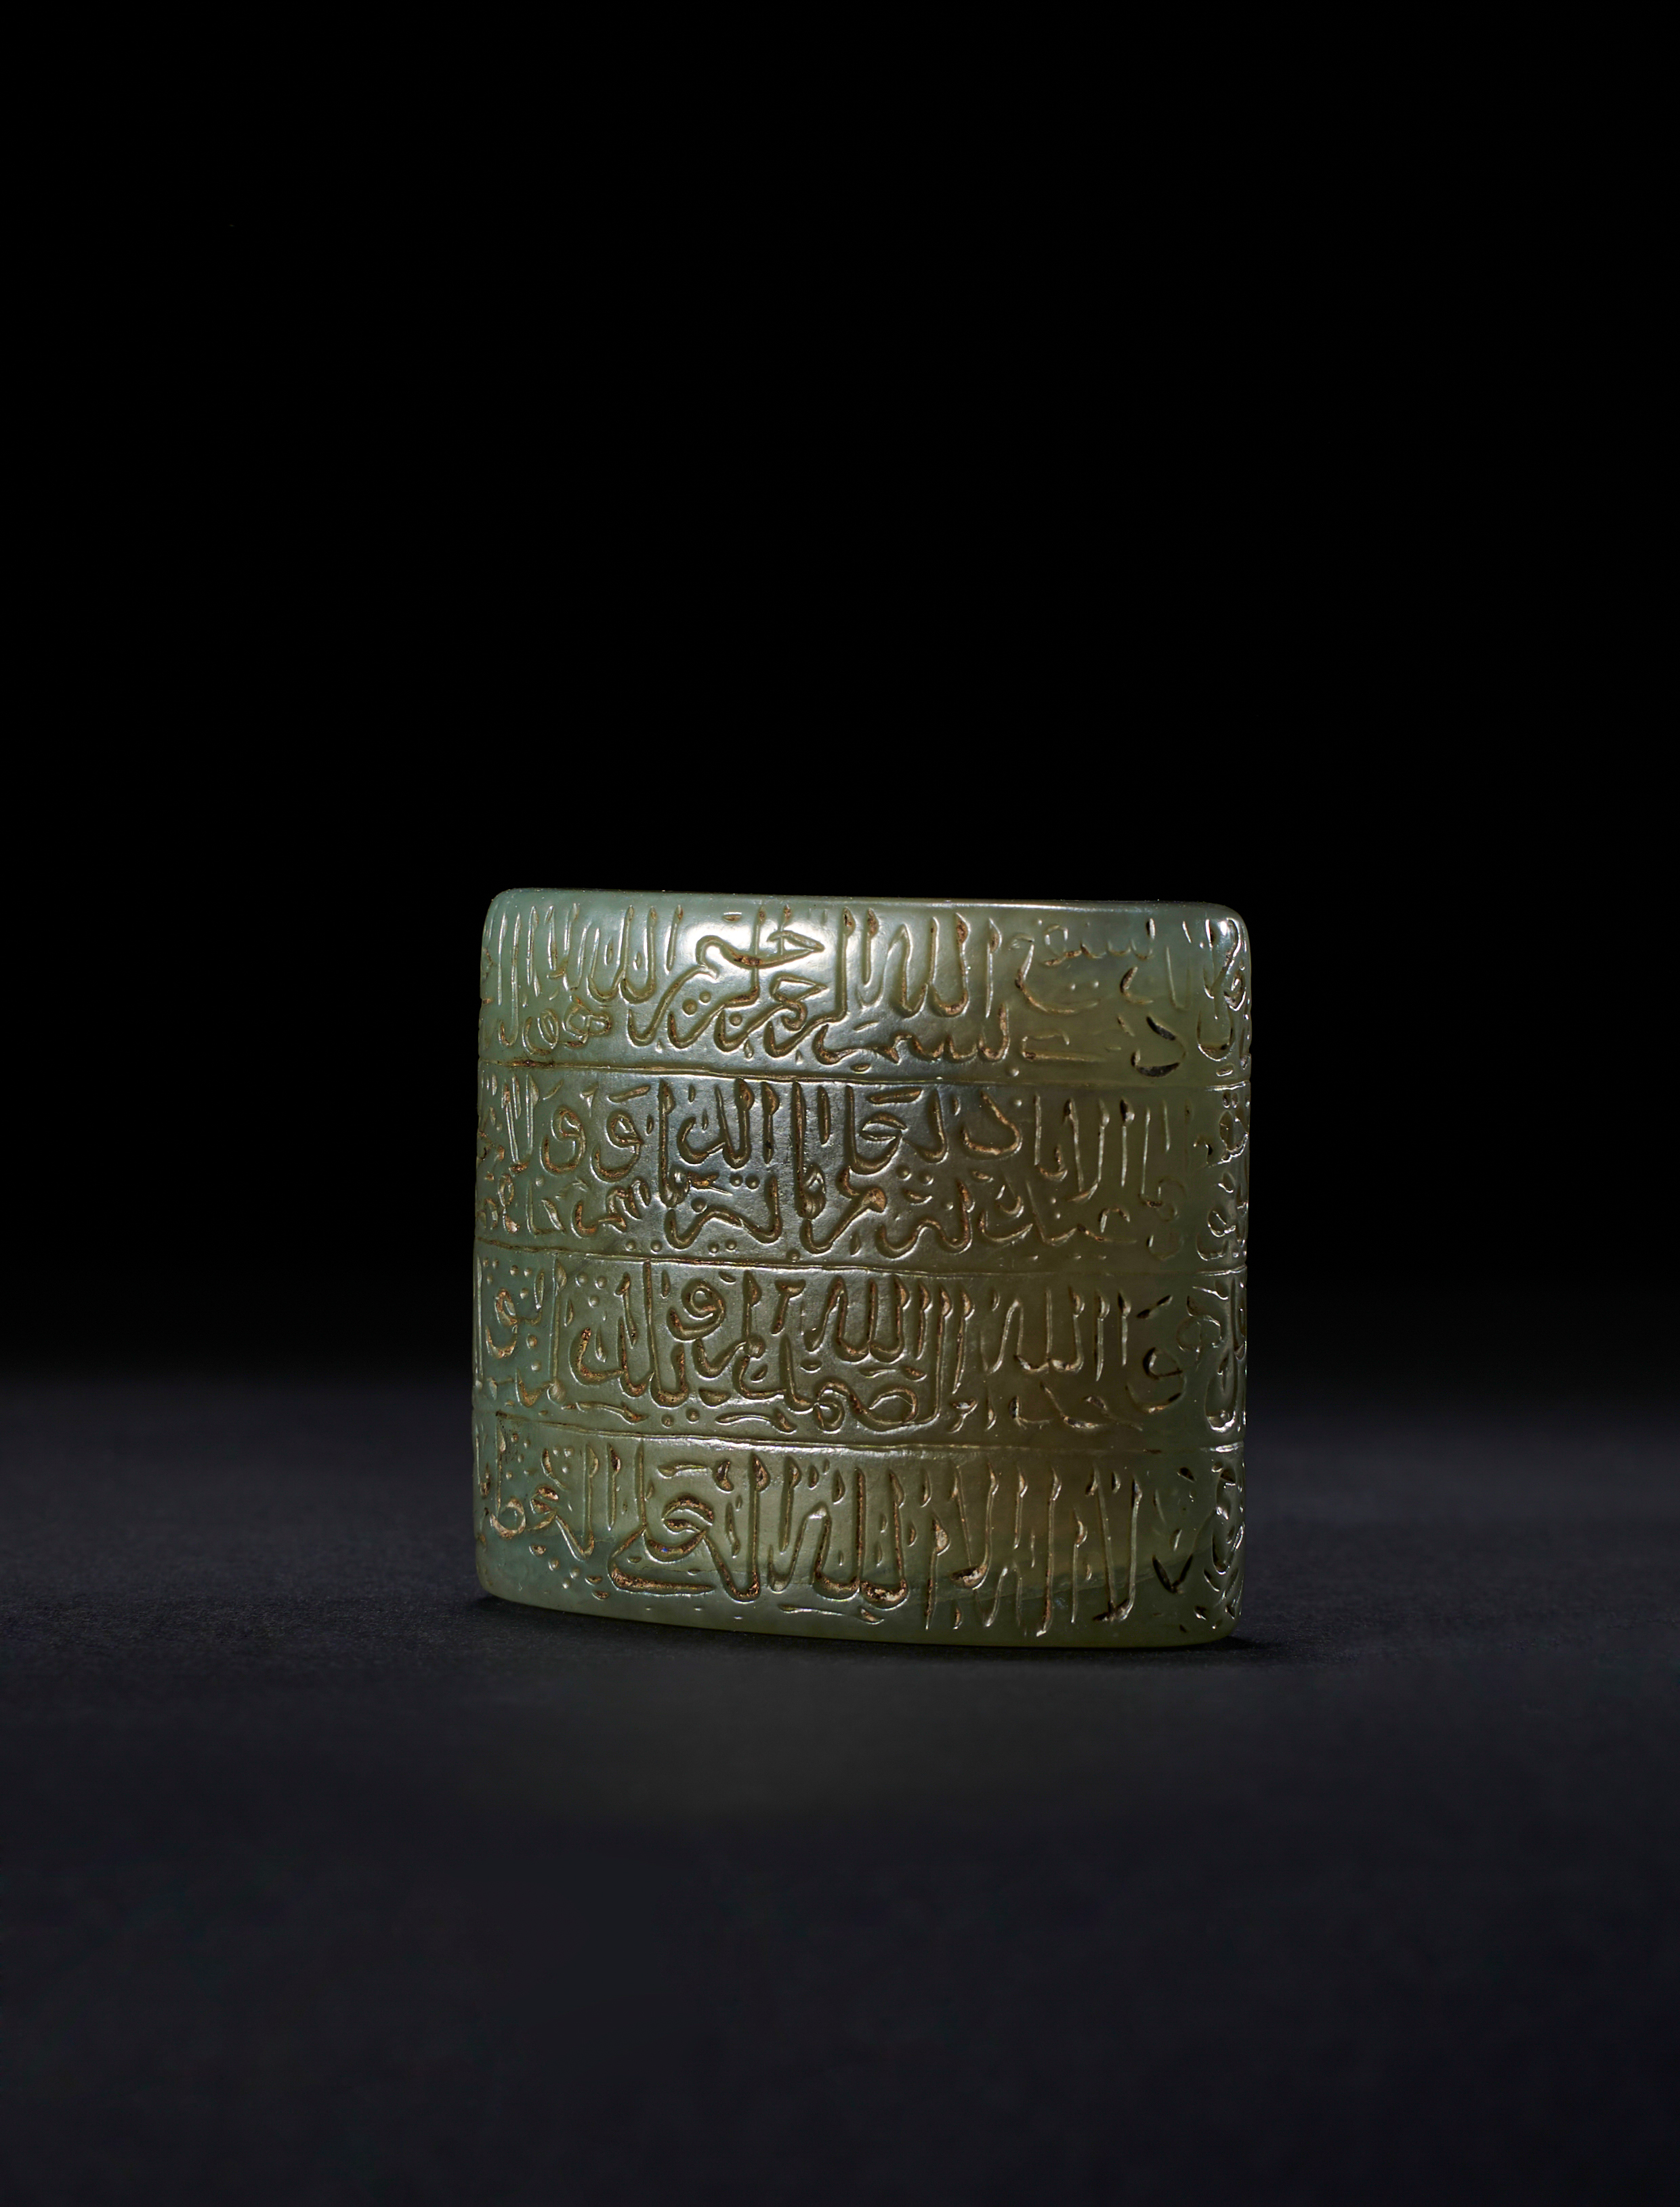 A RARE CALLIGRAPHIC INSCRIBED JADE INKWELL, 18TH CENTURY, MUGHAL, INDIA